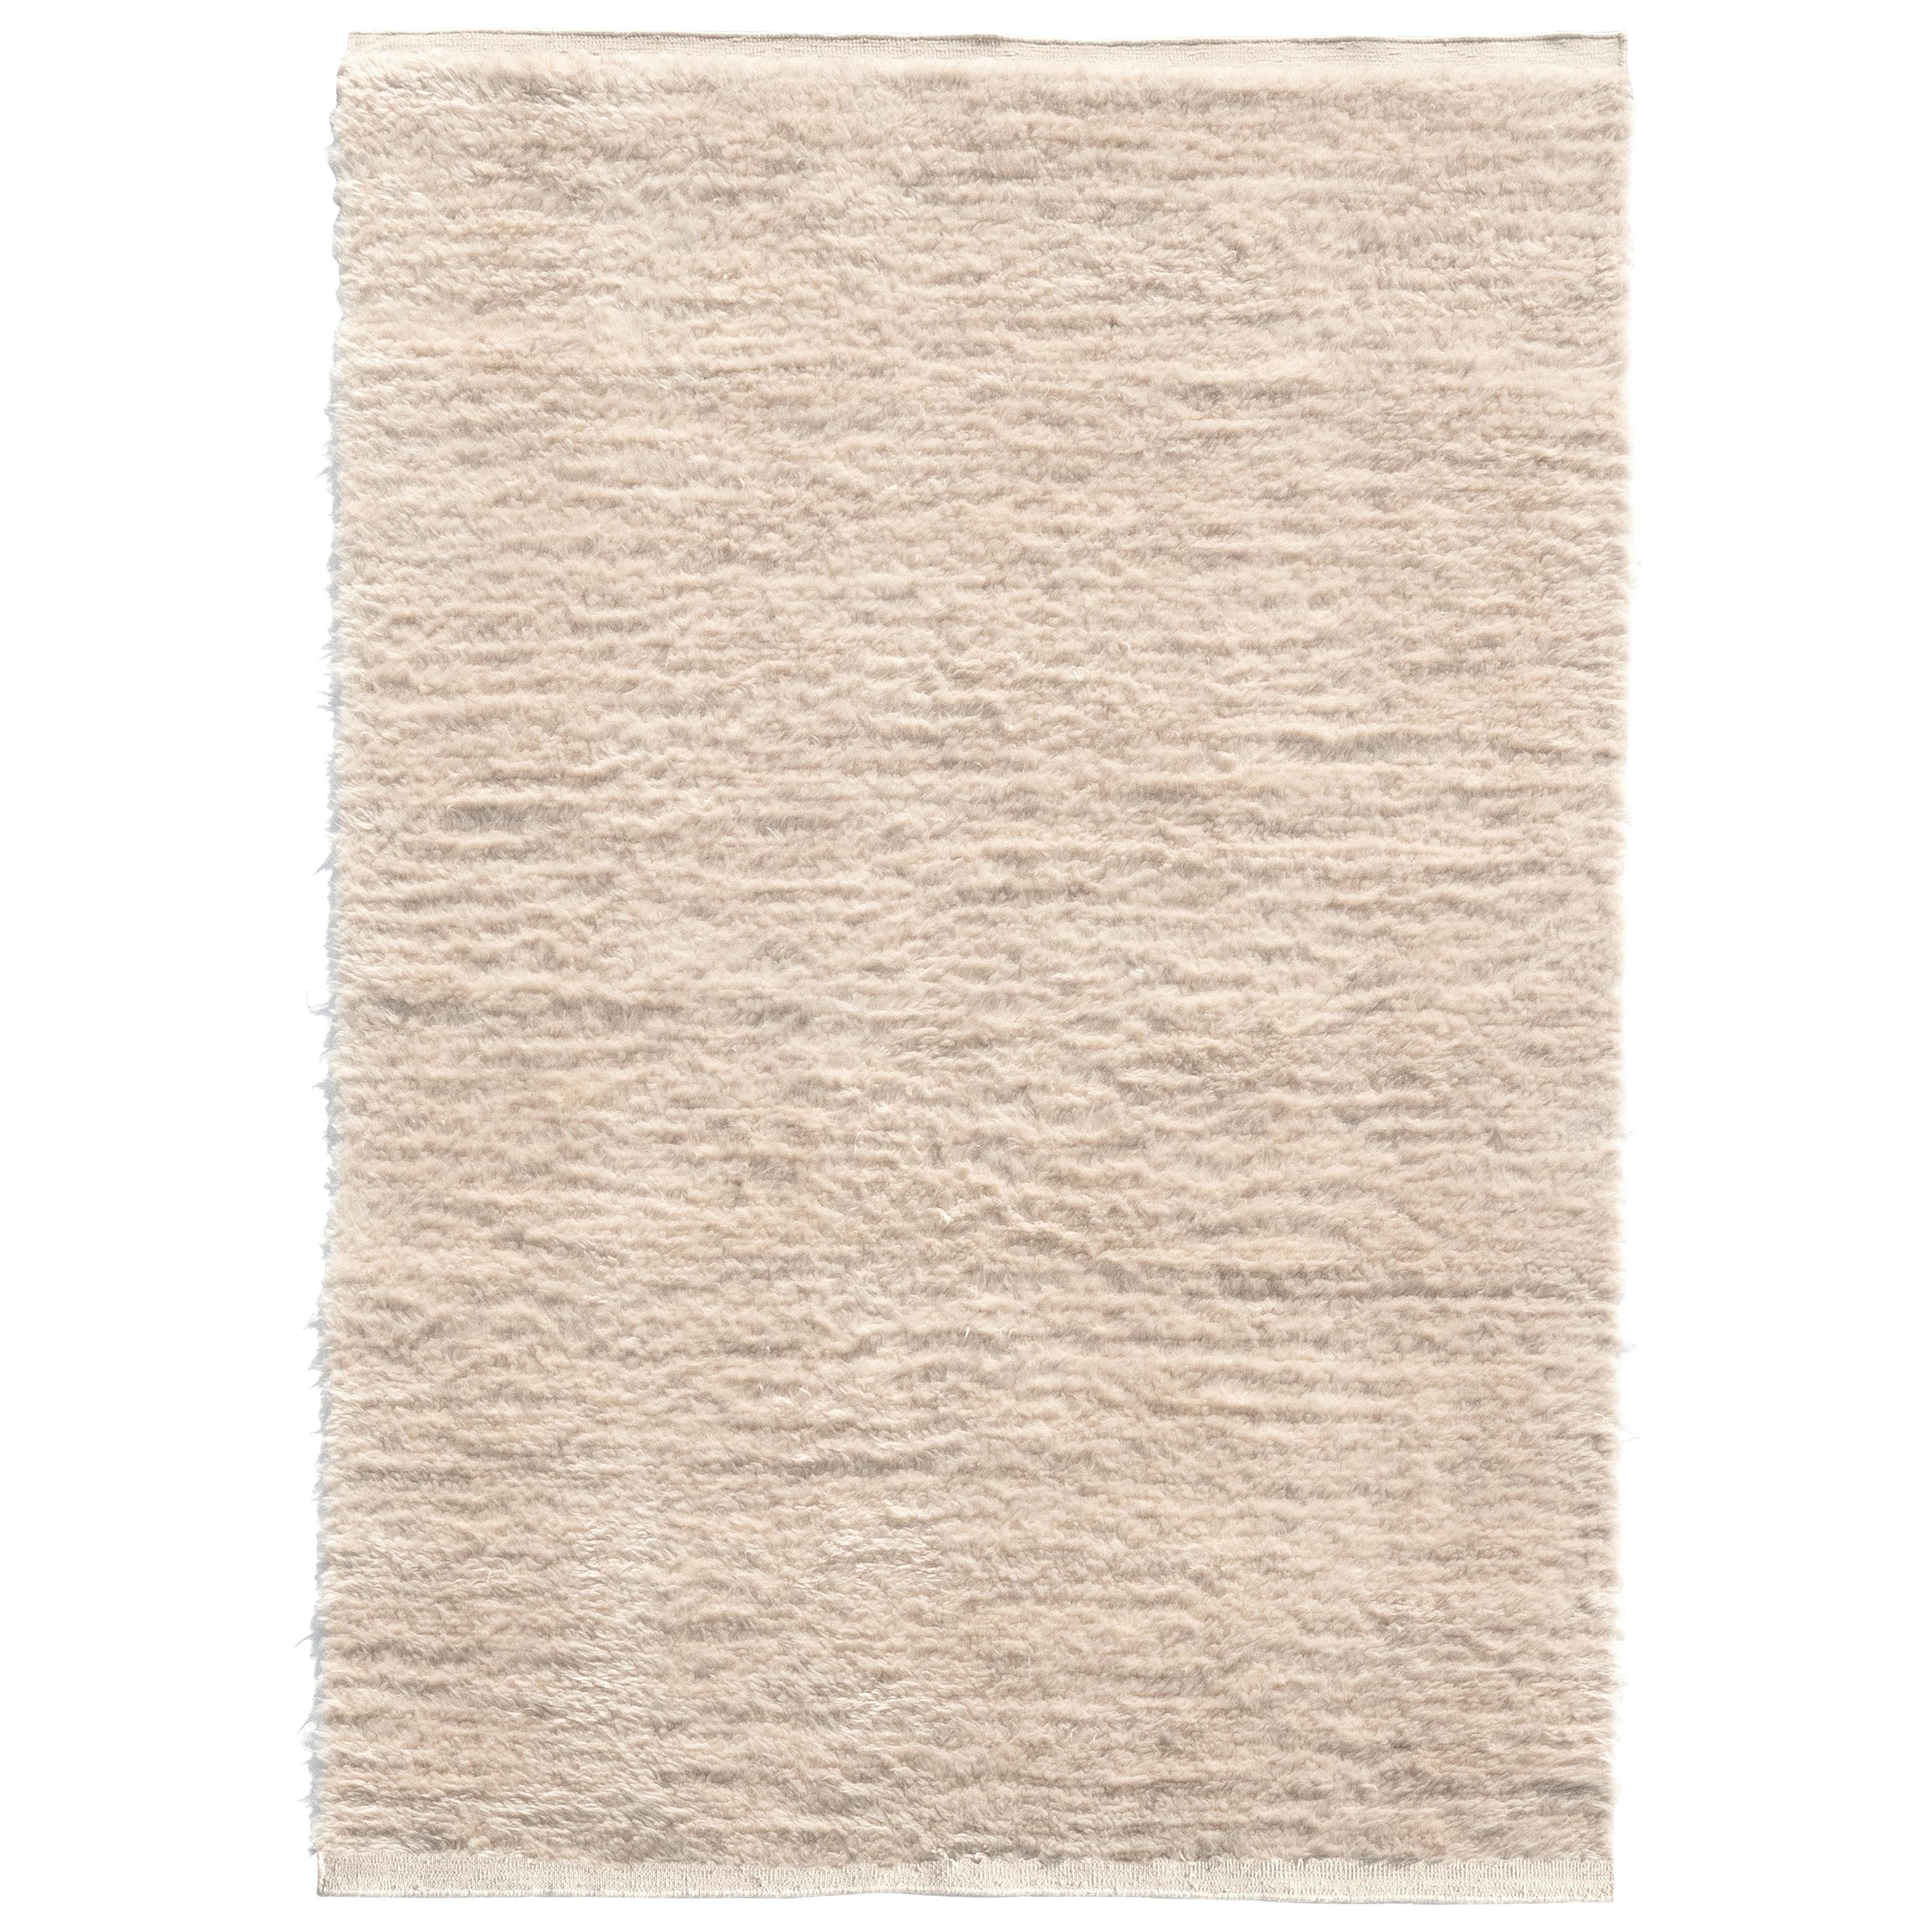 Nanimarquina Wellbeing Wool Chobi Rug in Ivory by Ilse Crawford, Small